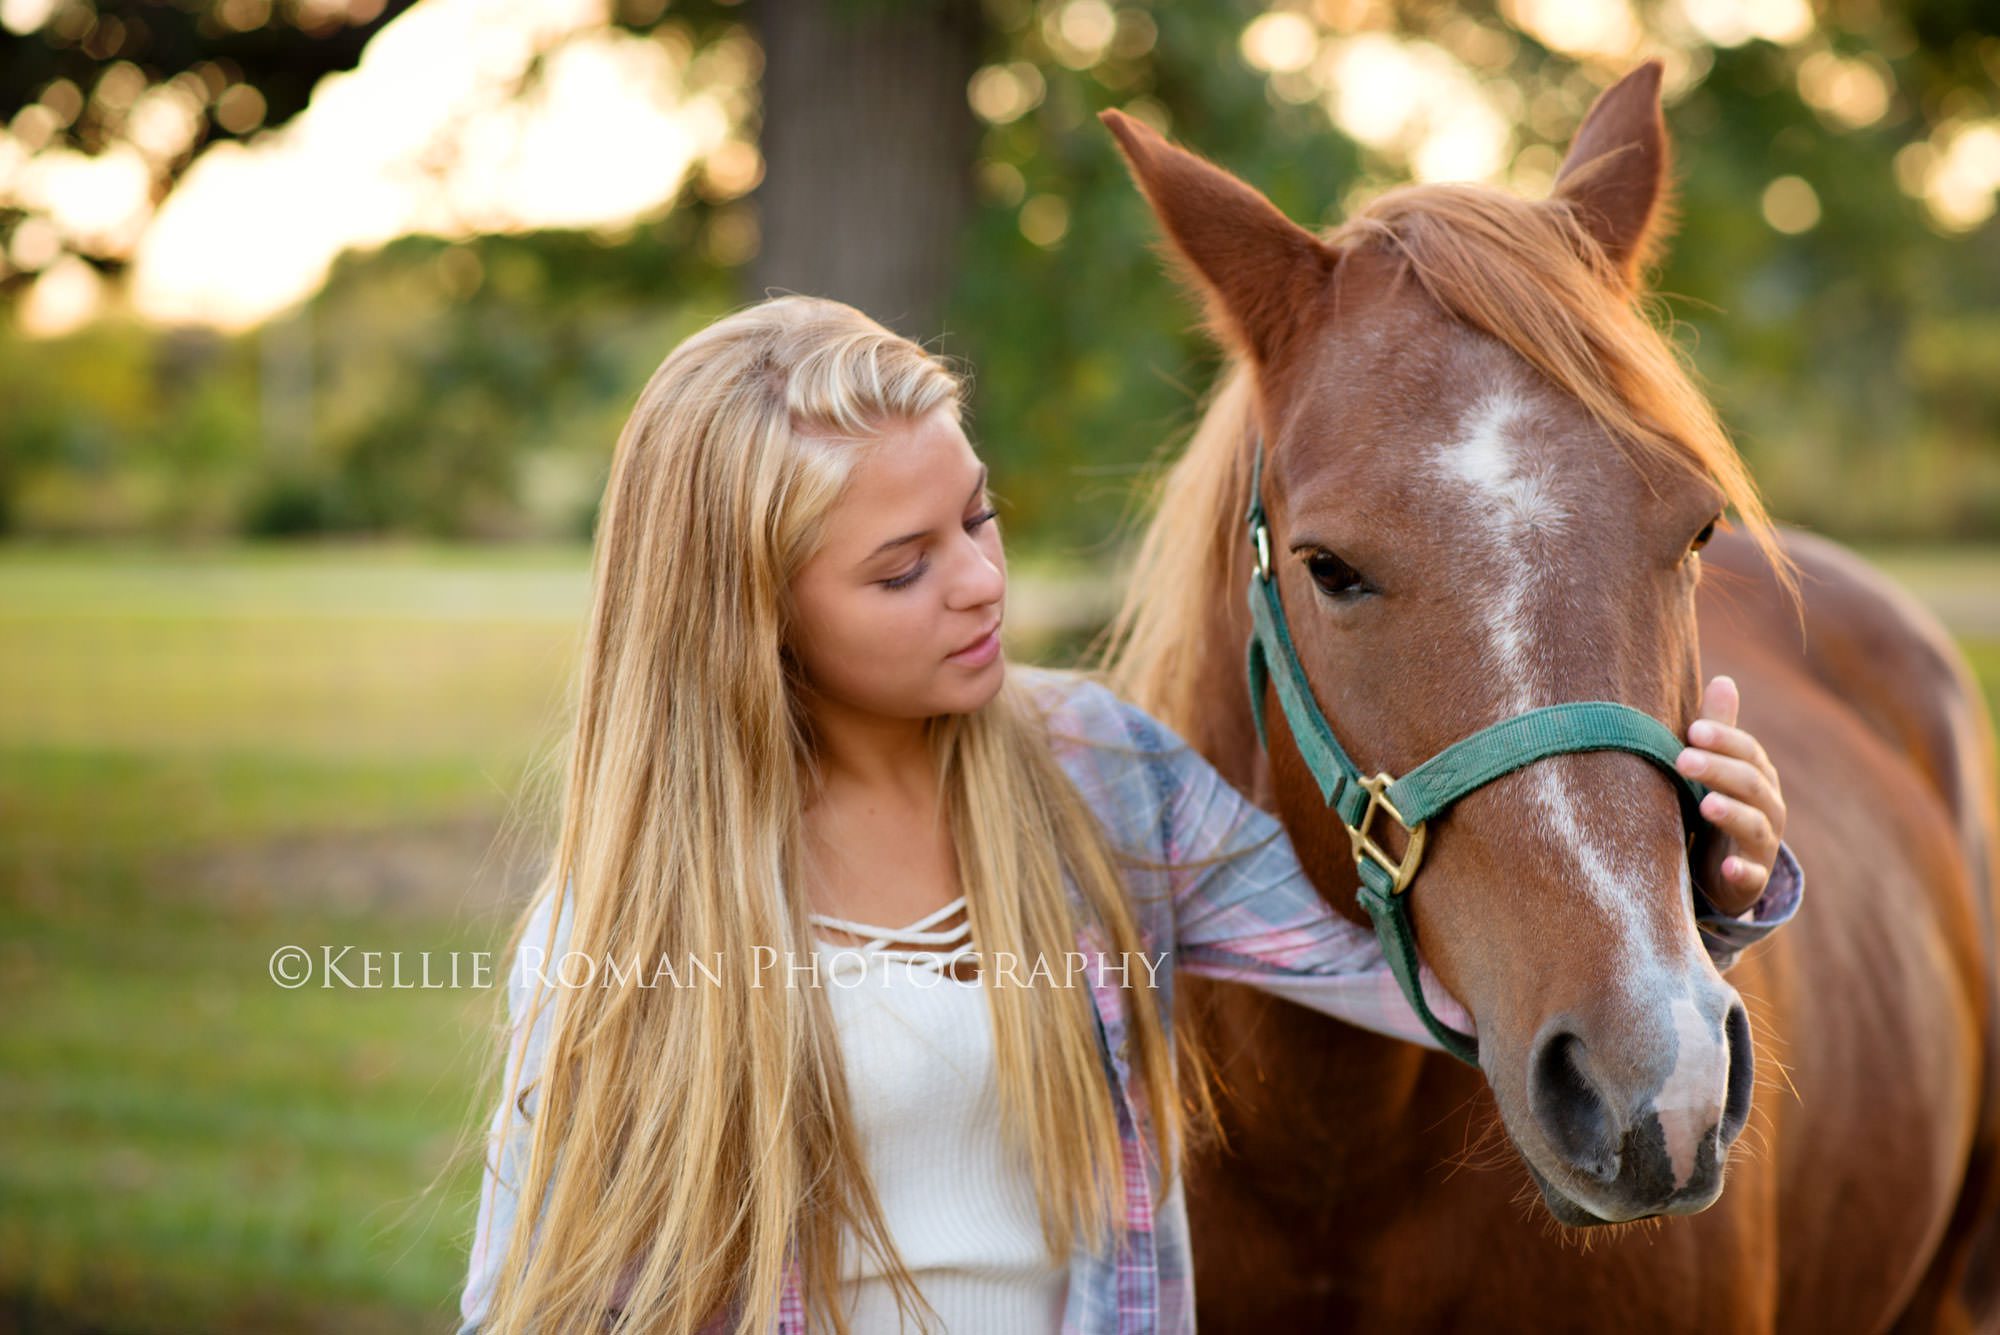 high school senior photos girl standing outside next to a horse. She is looking at the horse with her arm around it's face